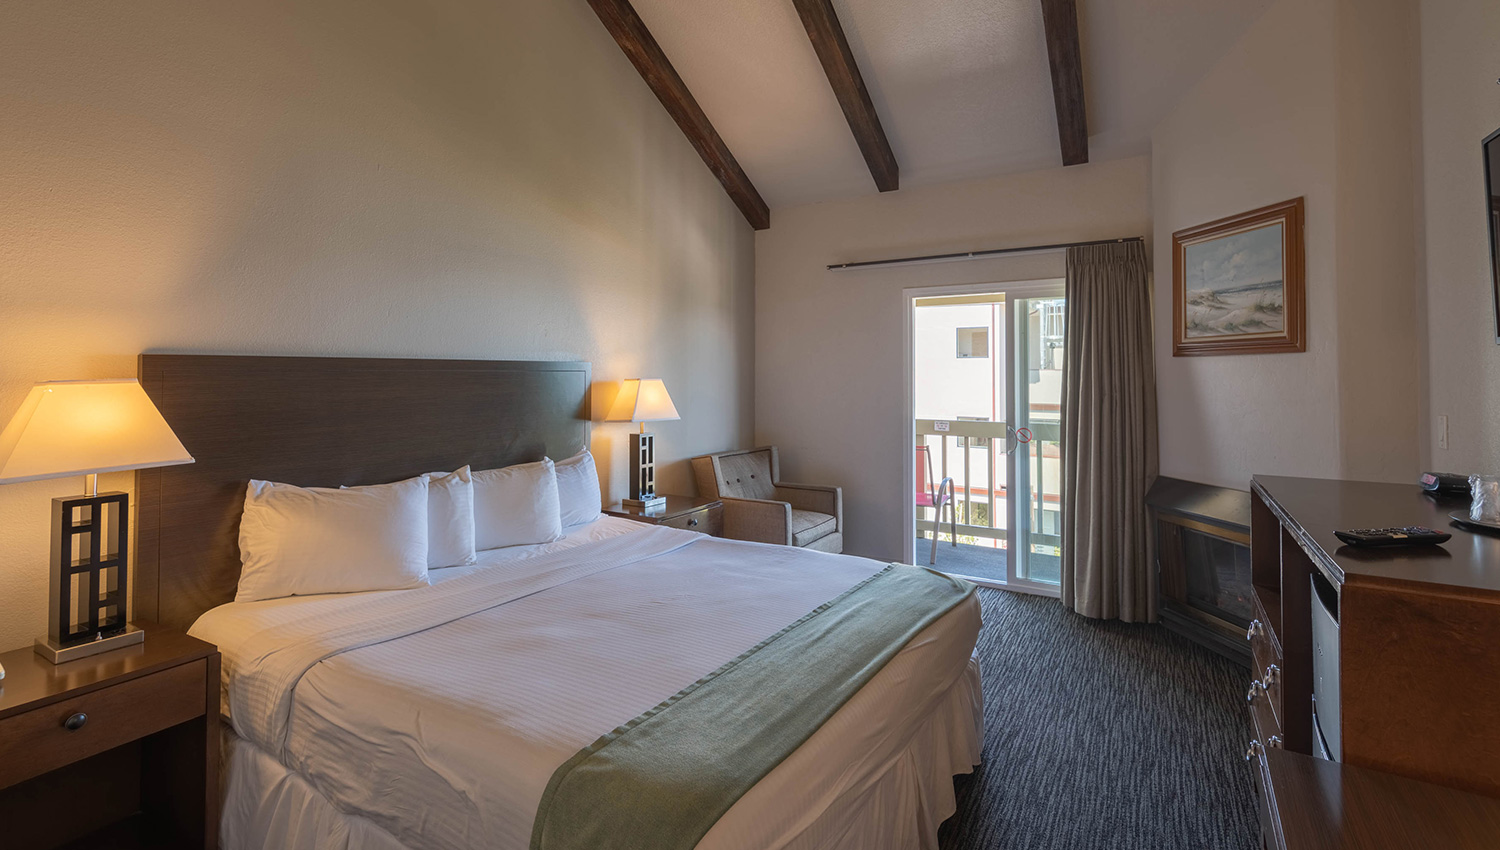 Our spacious Monterey, CA accommodations and thoughtful amenities await